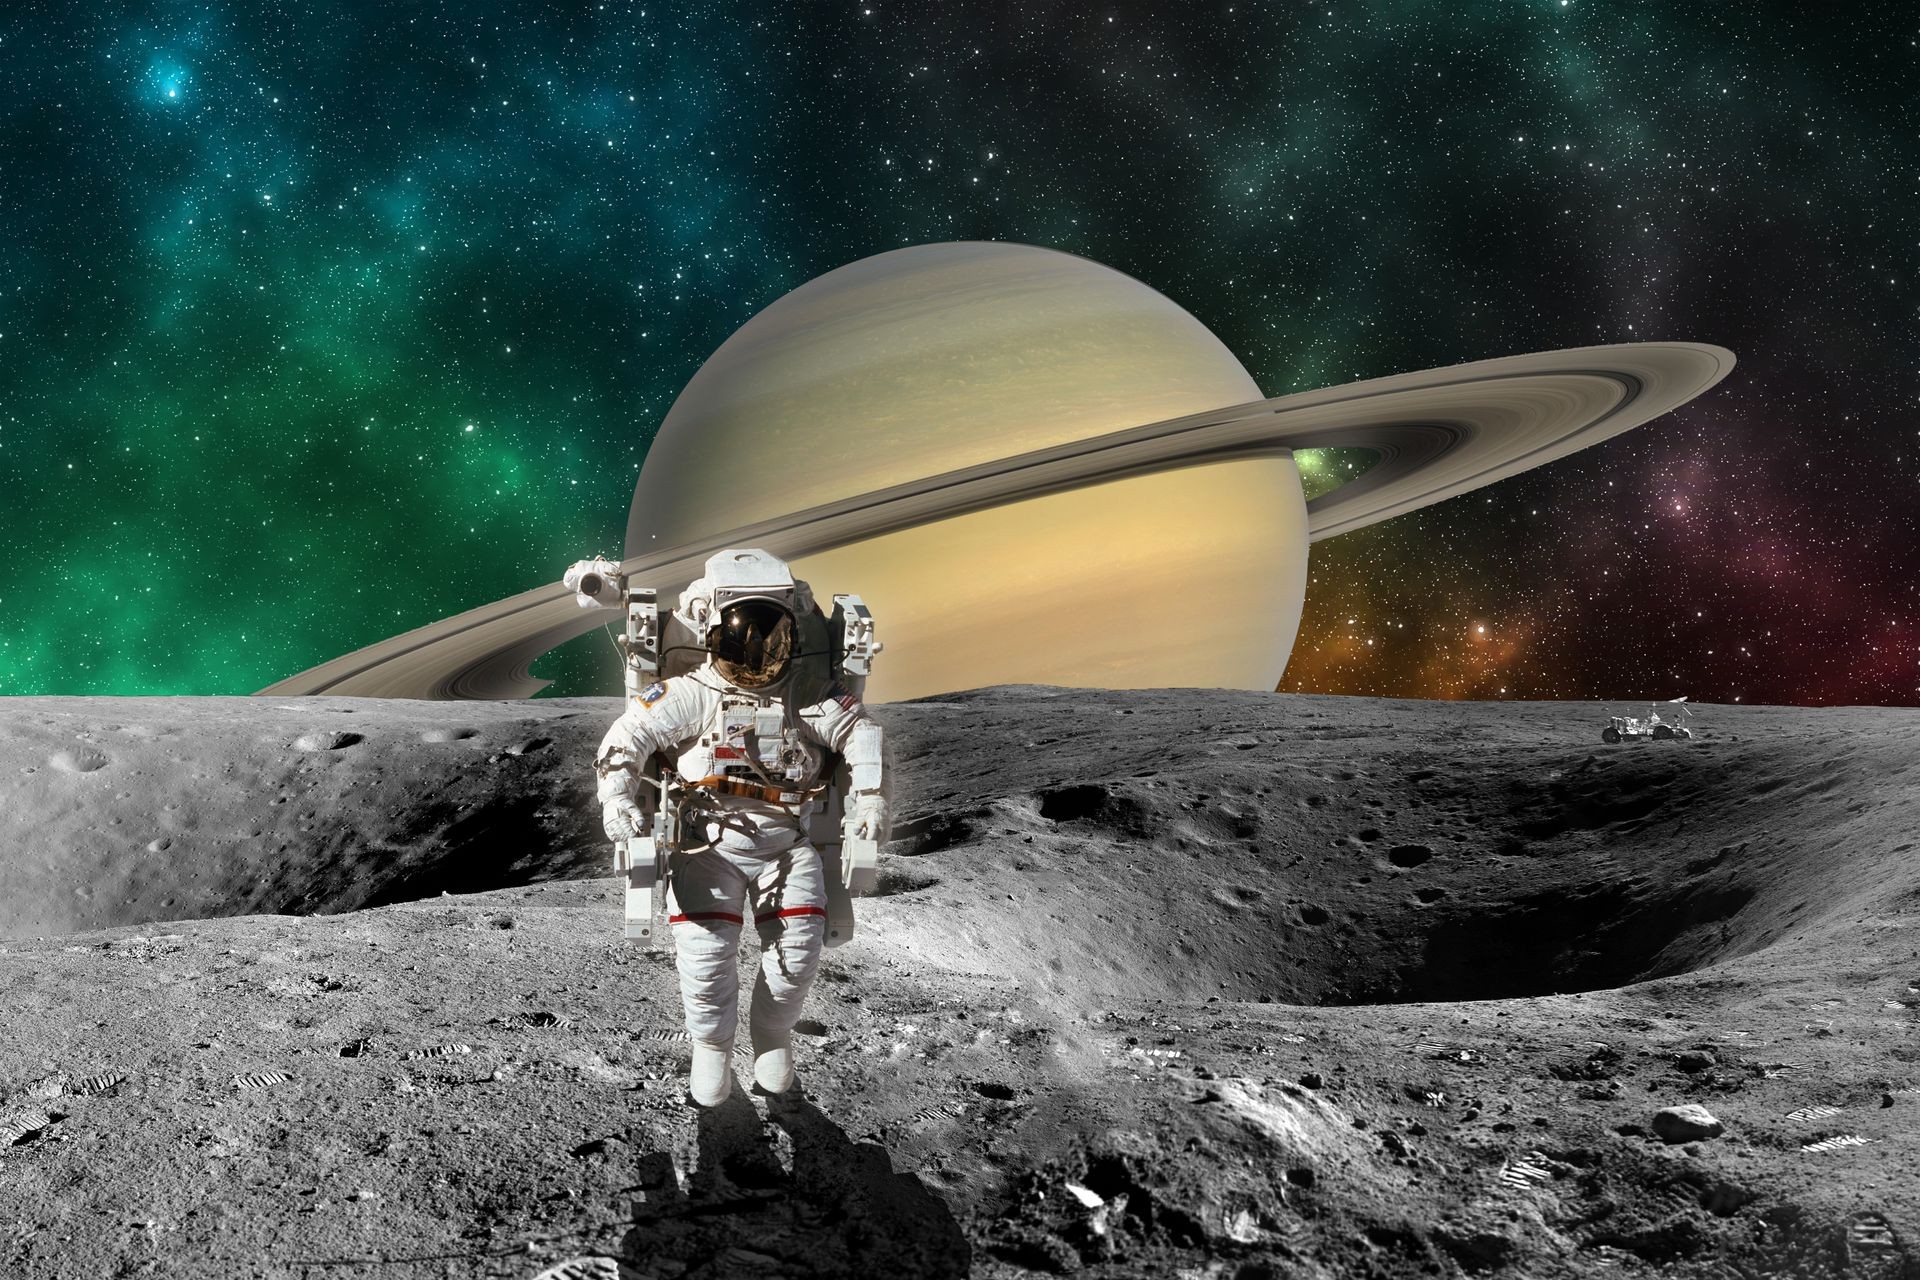 Planet Saturn from Saturn moon surface with astronaut. Elements of this image furnished by NASA